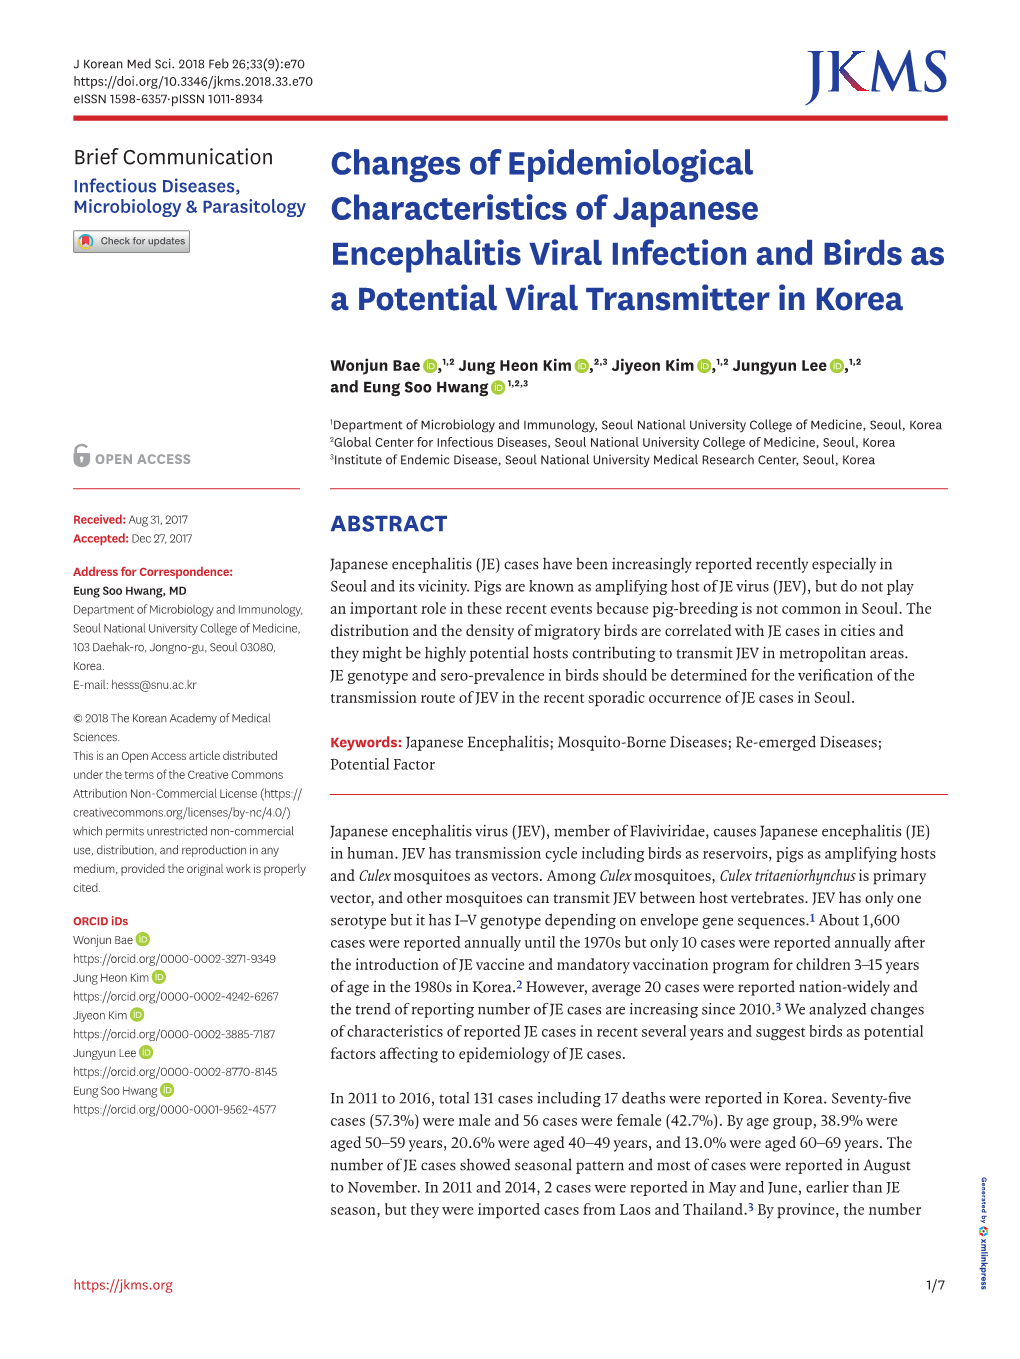 Changes of Epidemiological Characteristics of Japanese Encephalitis Viral Infection and Birds As a Potential Viral Transmitter I